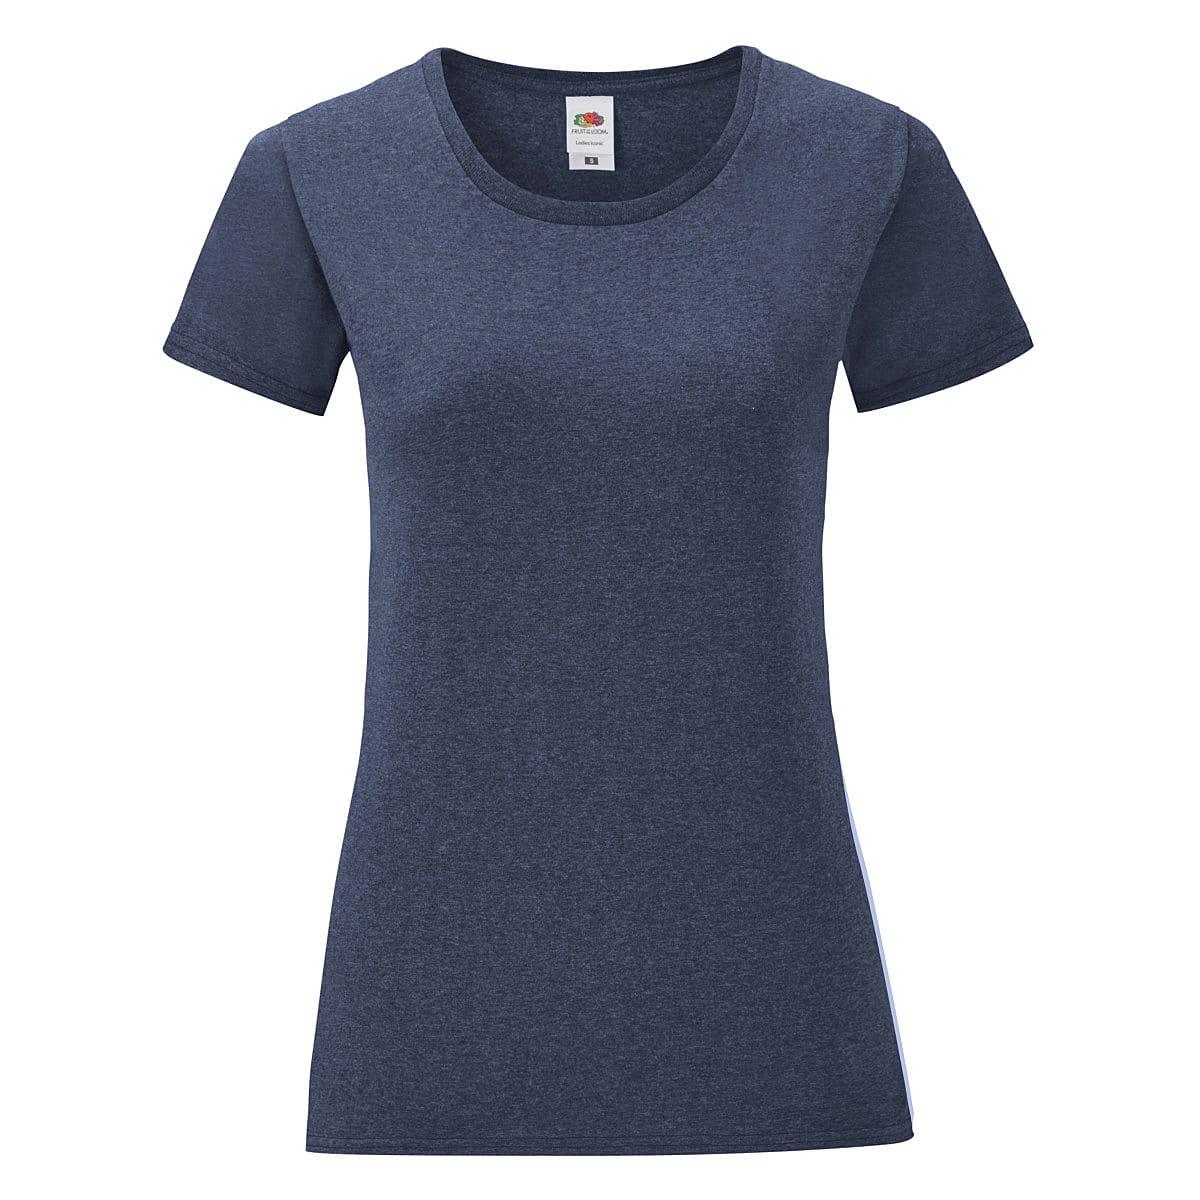 Fruit Of The Loom Womens Iconic T-Shirt in Vintage Heather Navy (Product Code: 61432)